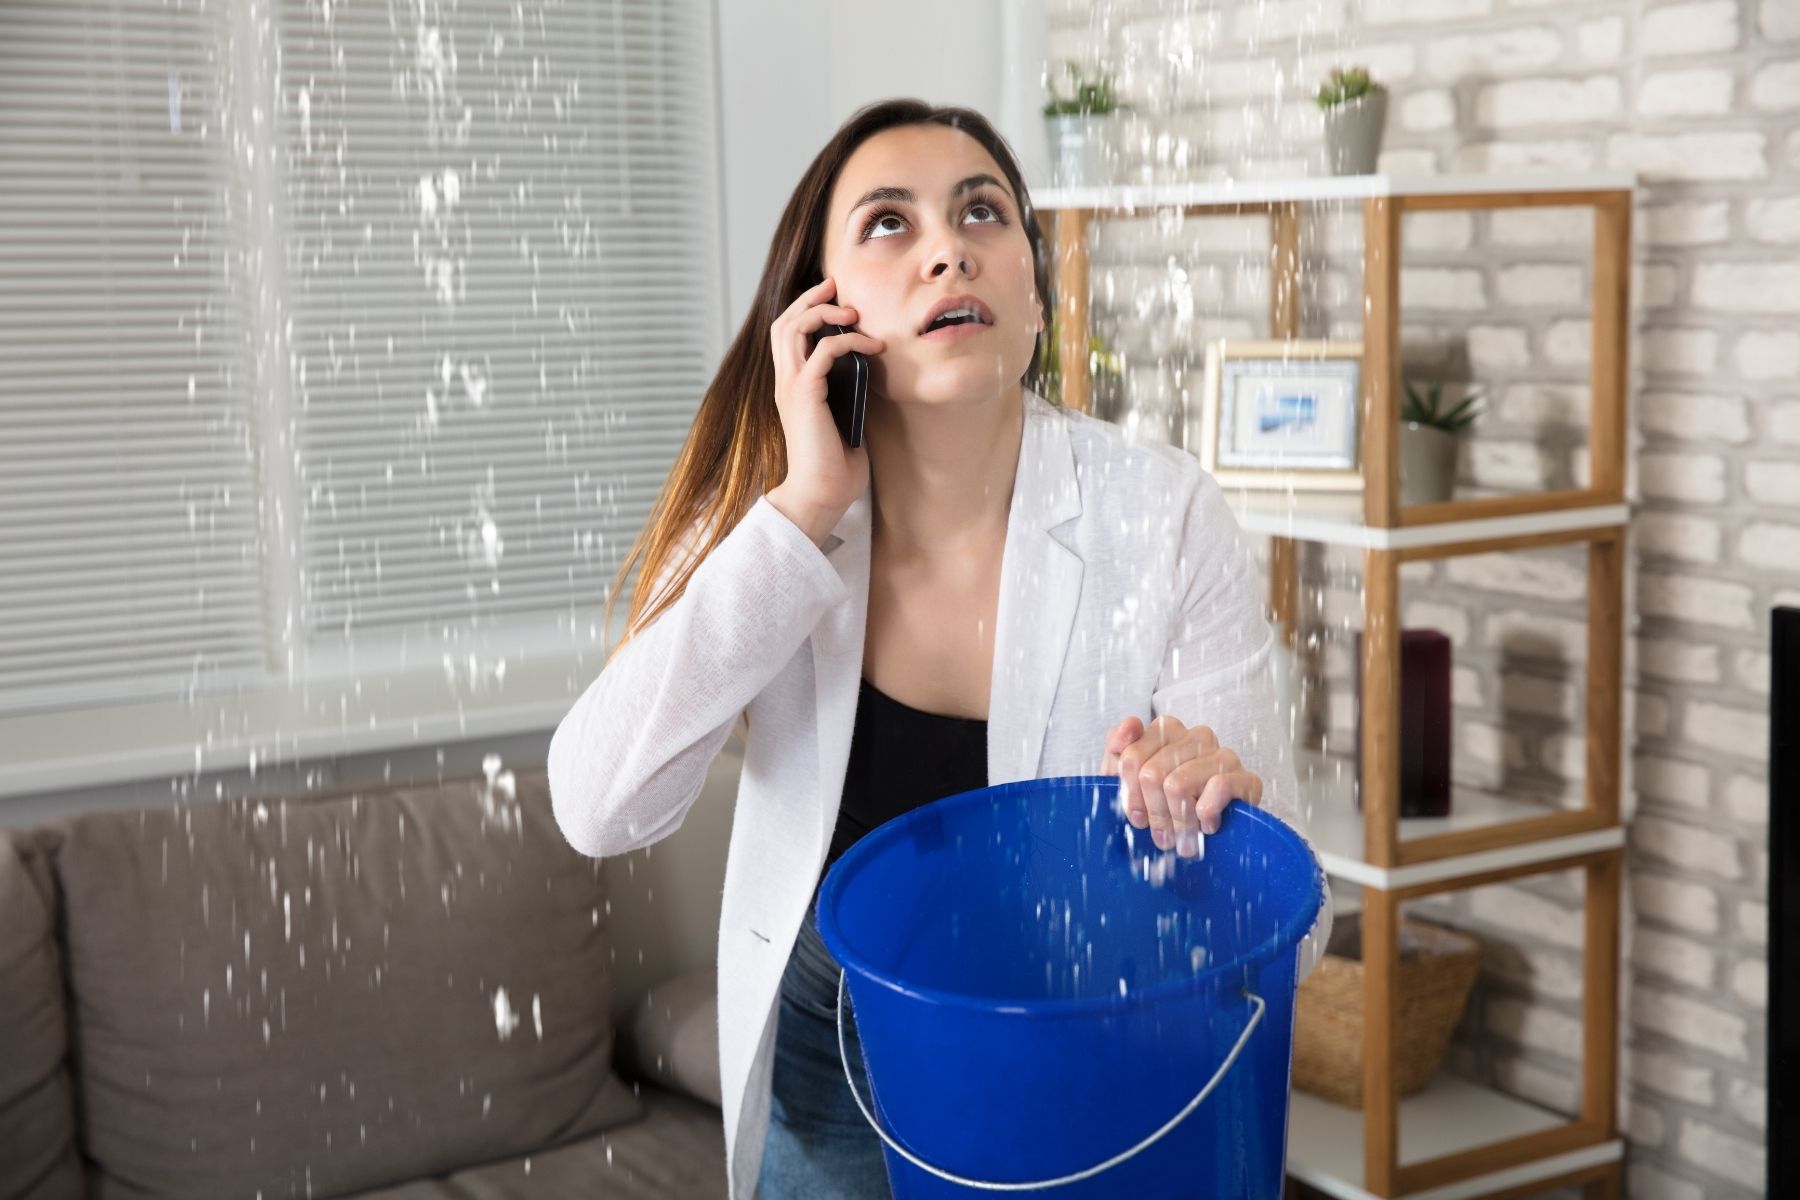 Photo of a woman holding a bucket under a leaking roof.